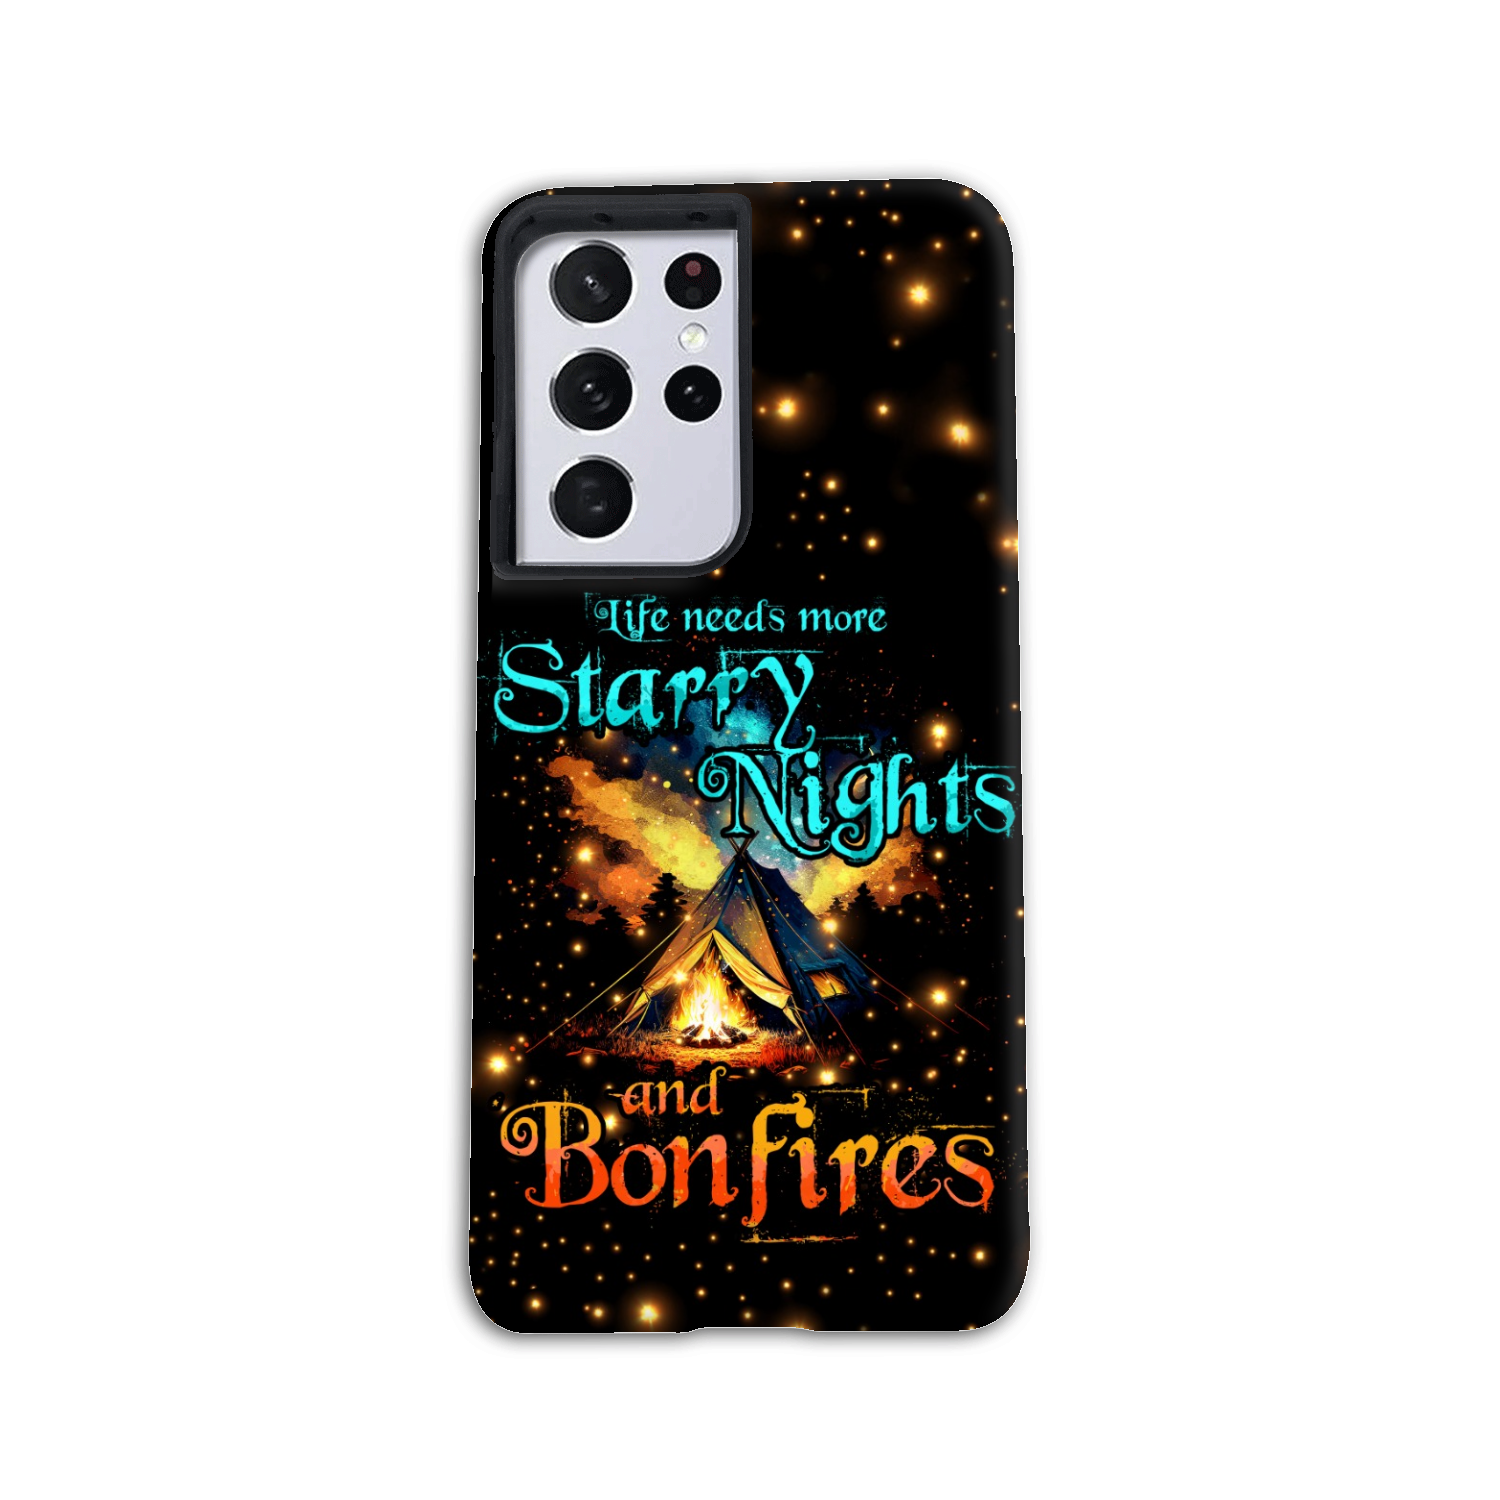 LIFE NEEDS MORE STARRY NIGHTS AND BONFIRES PHONE CASE - TYTD2804232